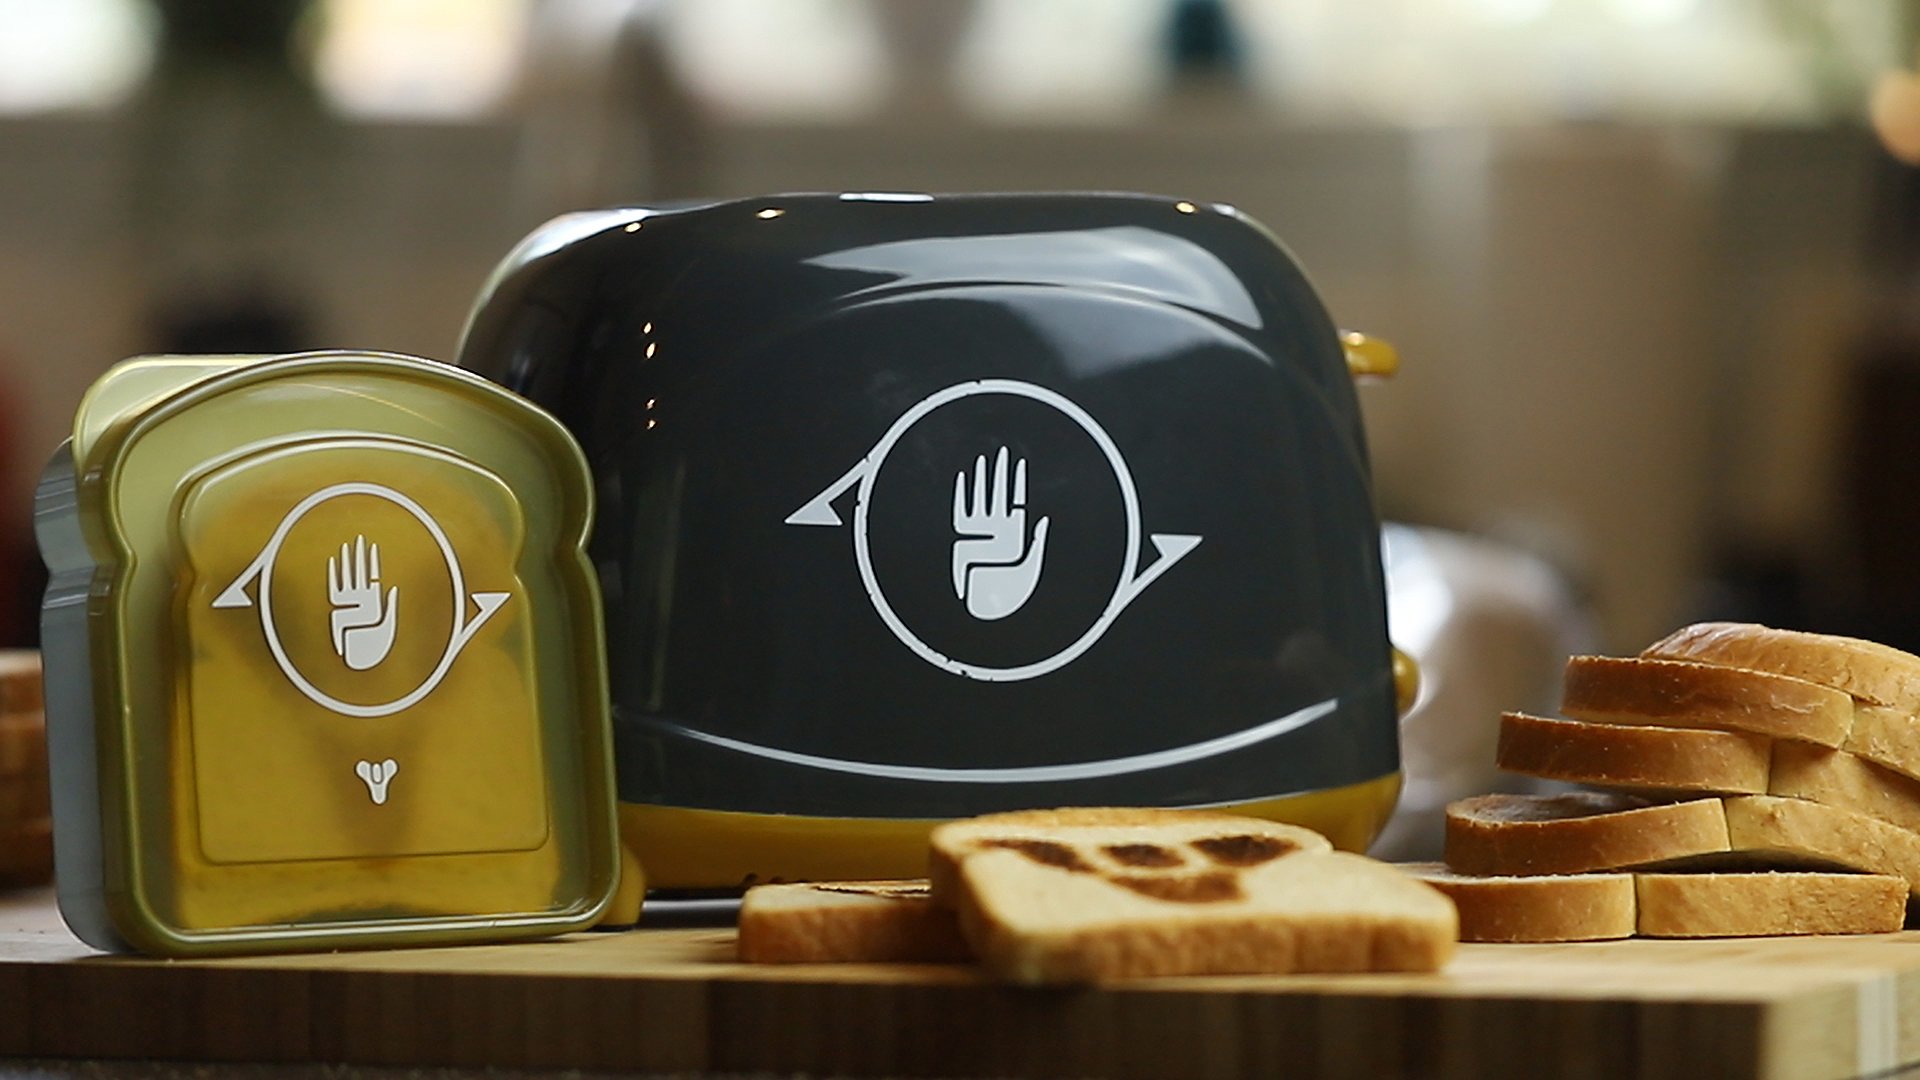 Bungie's Destiny 2 Jotunn toaster is disappointing fans